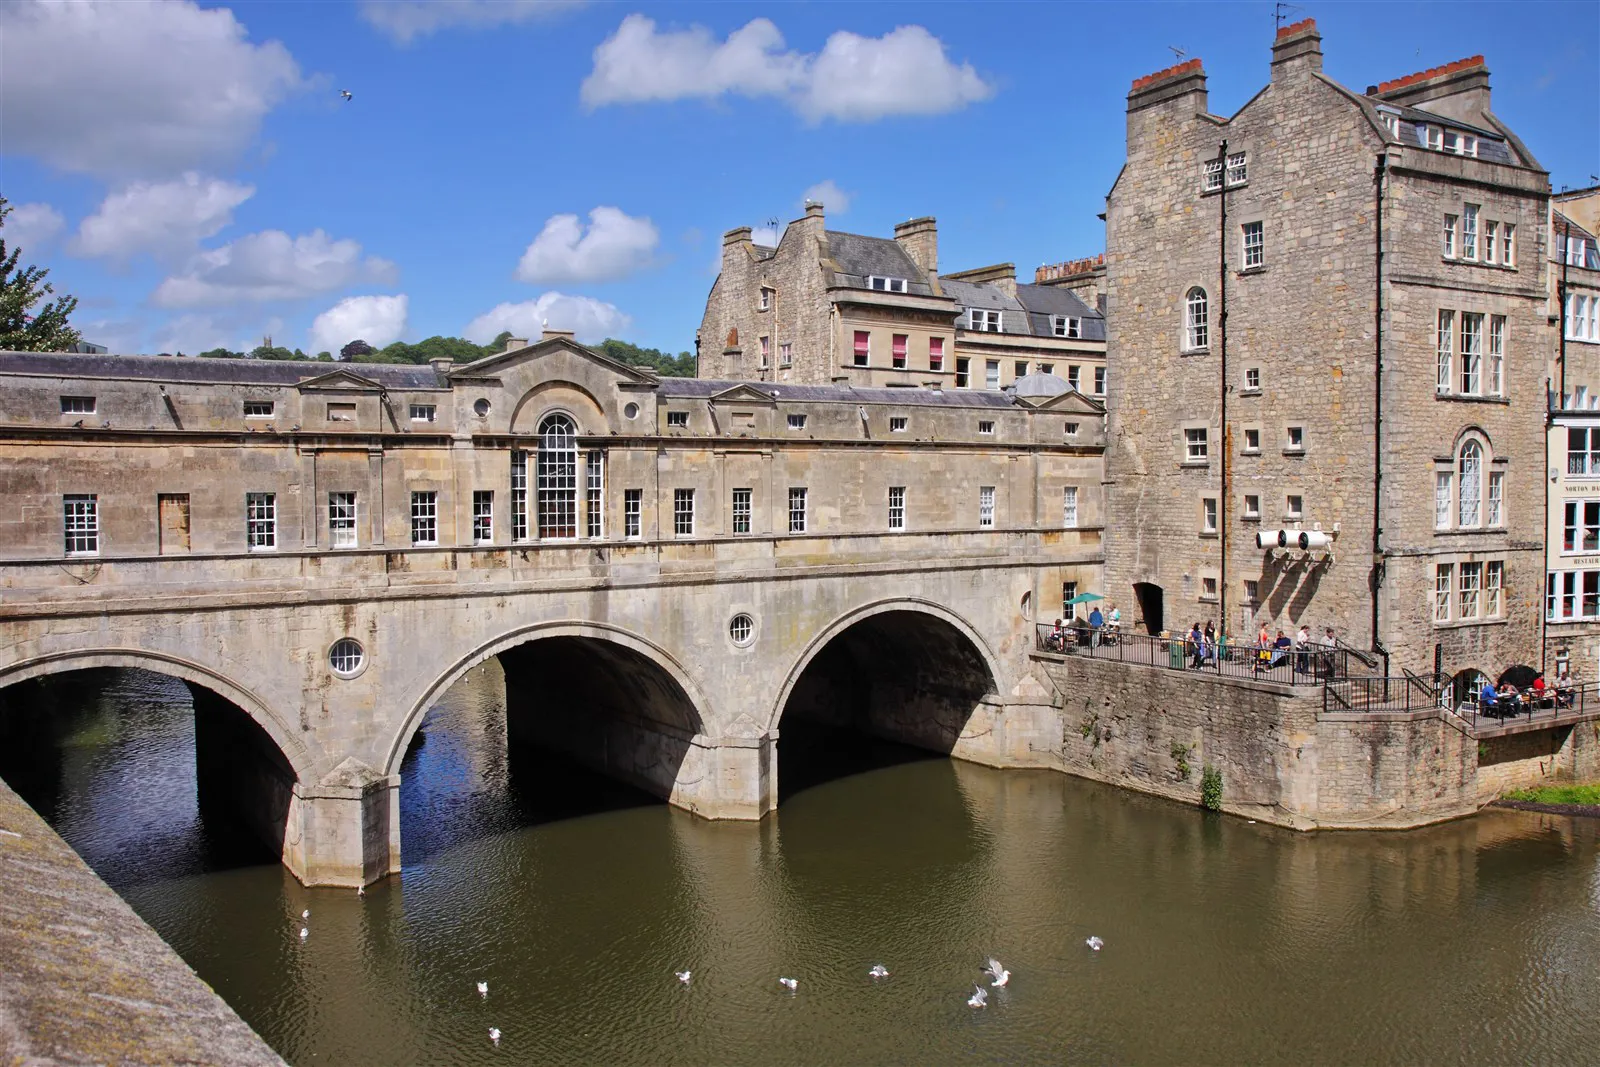 Our top 10 free things to do in Bath